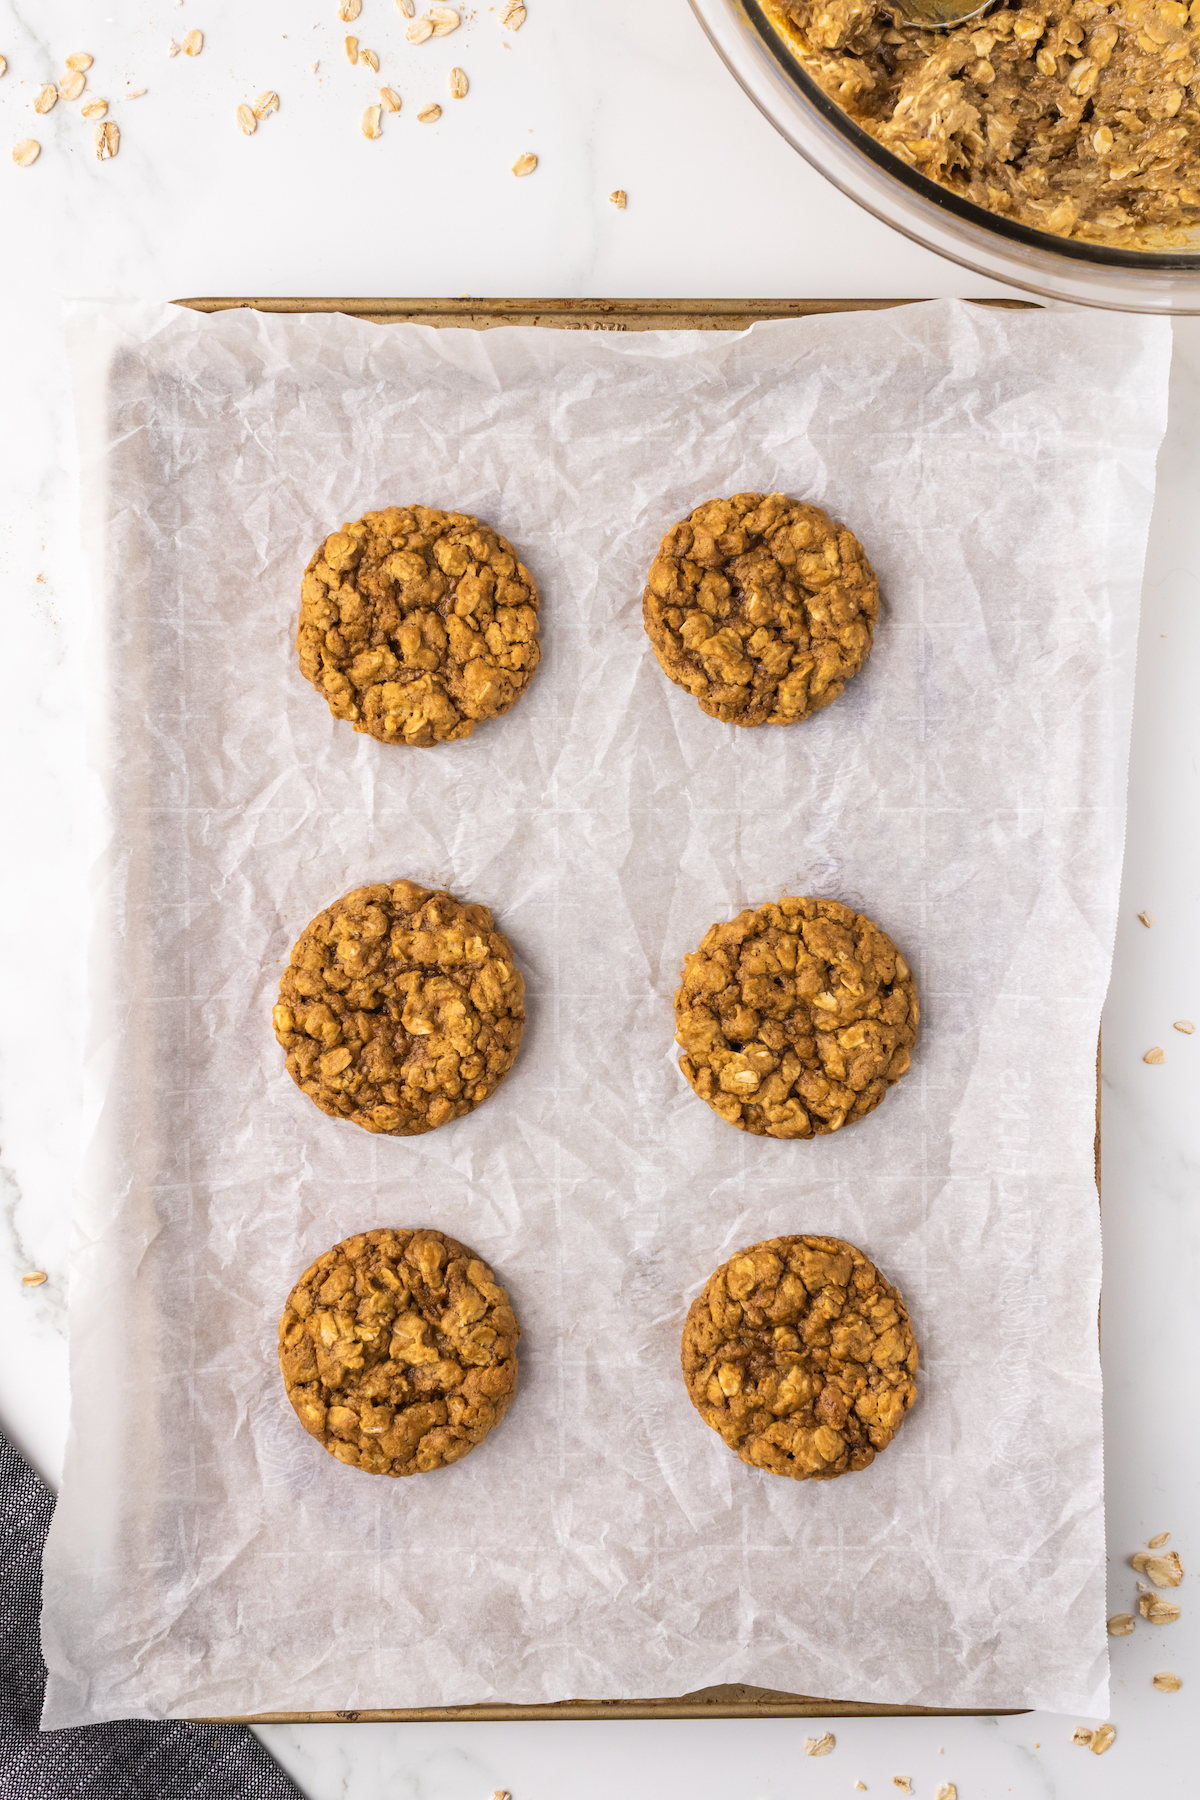 Baked oatmeal cookies for the cream pies